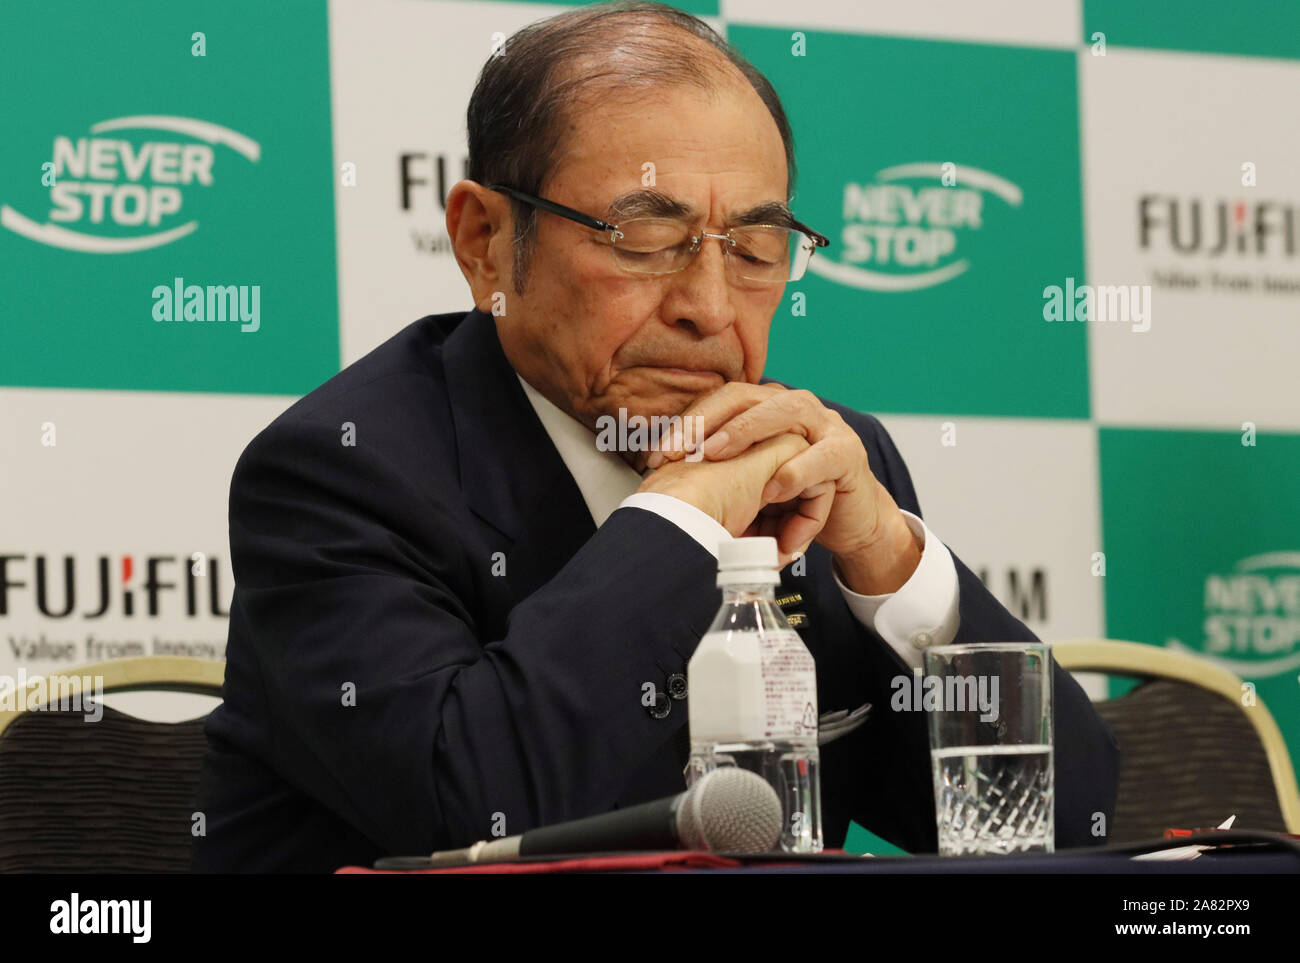 Tokyo, Japan. 5th Nov, 2019. Japan's Fujifilm Holdings chairman and CEO Shigetaka Komori announces Fujifilm will acquire 25% stake in Fuji Xerox owned by Xerox and Fujifilm's ownership of Fuji Xerox to 100% at a press conference in Tokyo on Tuesday, November 5, 2019. Fujifilm Holdings gave up a plan to purchase Xerox Corp in the United States. Credit: Yoshio Tsunoda/AFLO/Alamy Live News Stock Photo